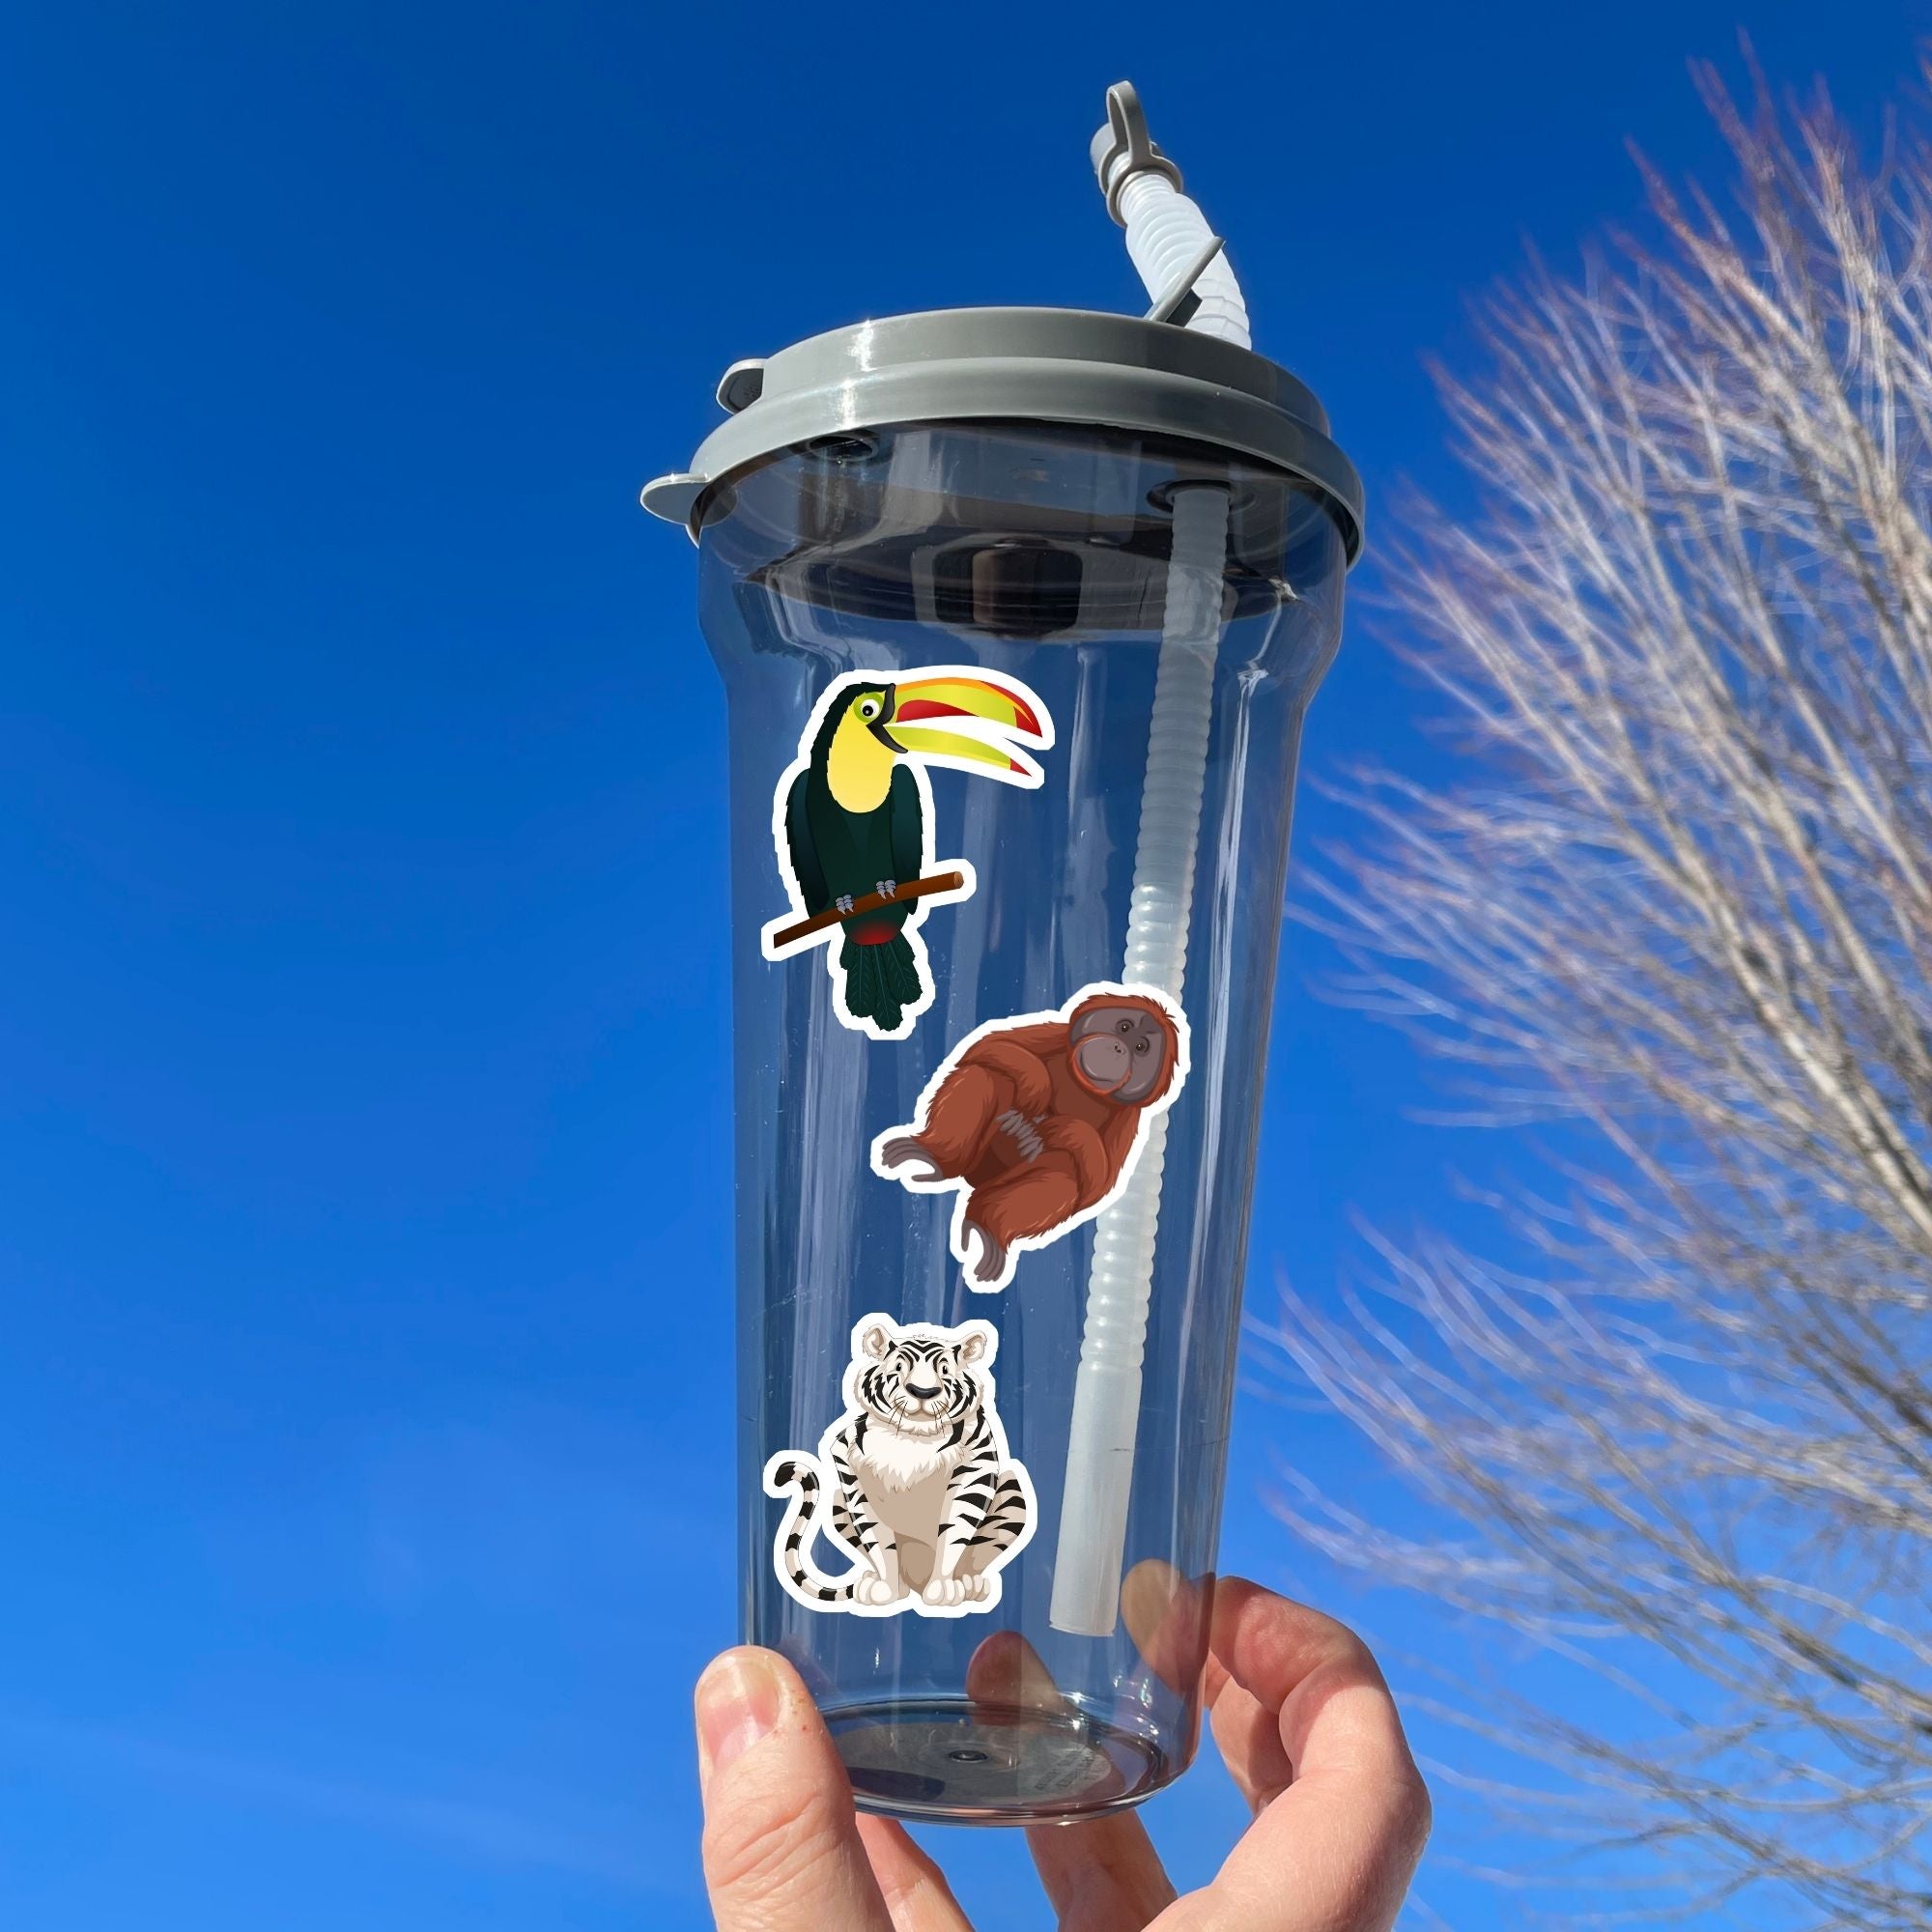 This sticker sheet has sticker images of your favorite jungle and rain forest creatures! There are a dozen different sticker images including tigers, a lion, a gorilla, snakes, and even a sloth.  This image shows a water bottle with stickers of a toucan, an orangutan, and a white tiger, applied to it. 